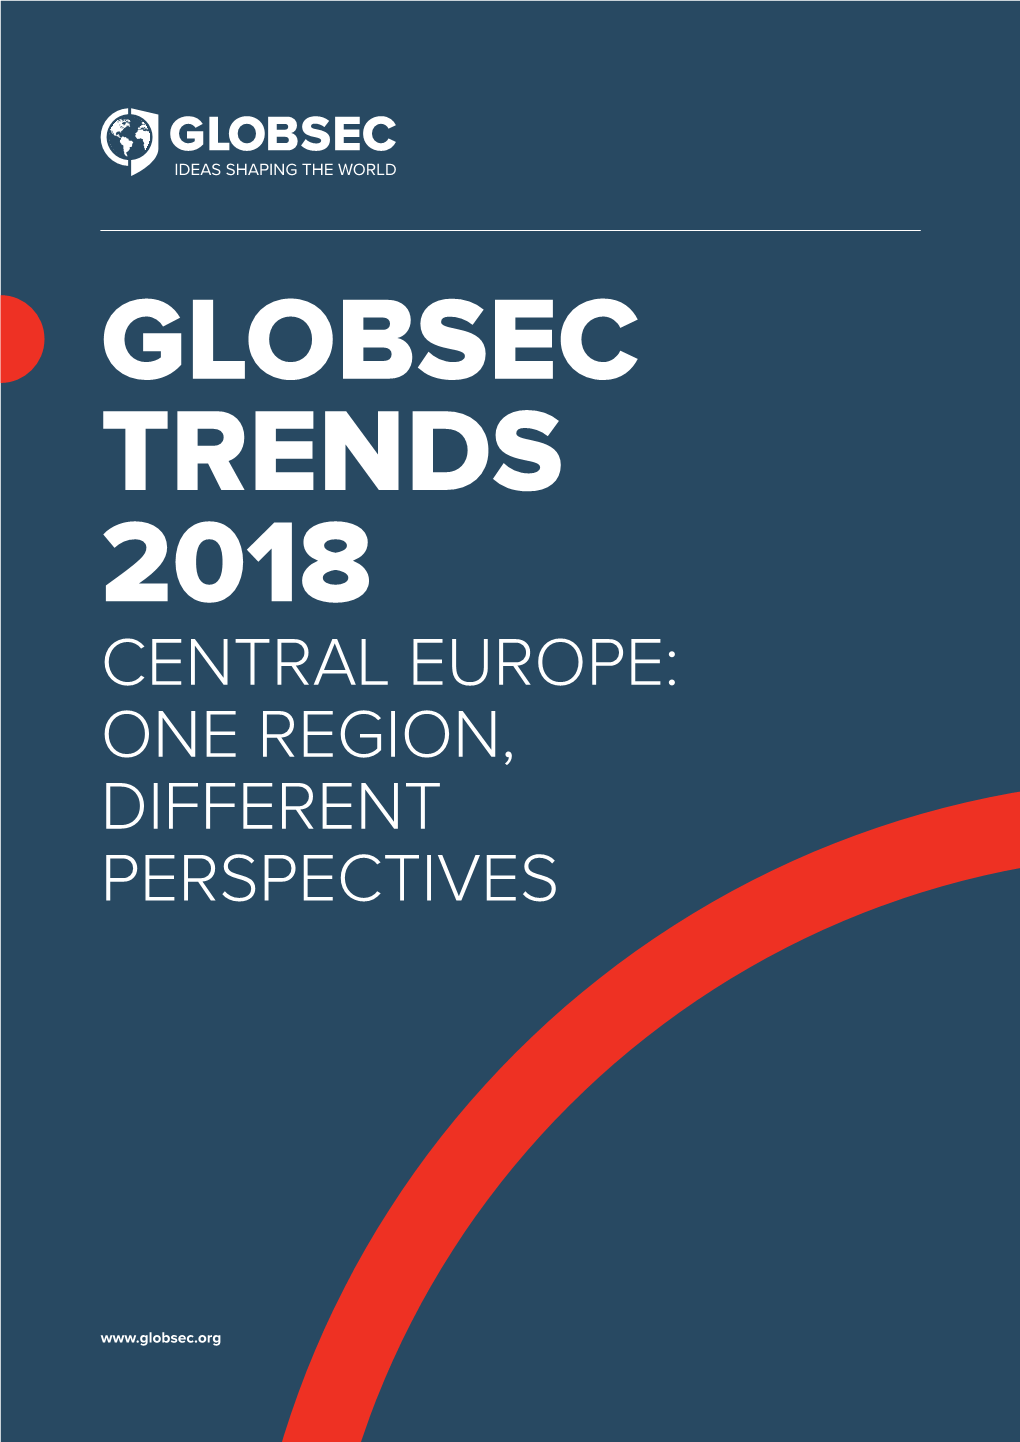 Globsec Trends 2018 Central Europe: One Region, Different Perspectives